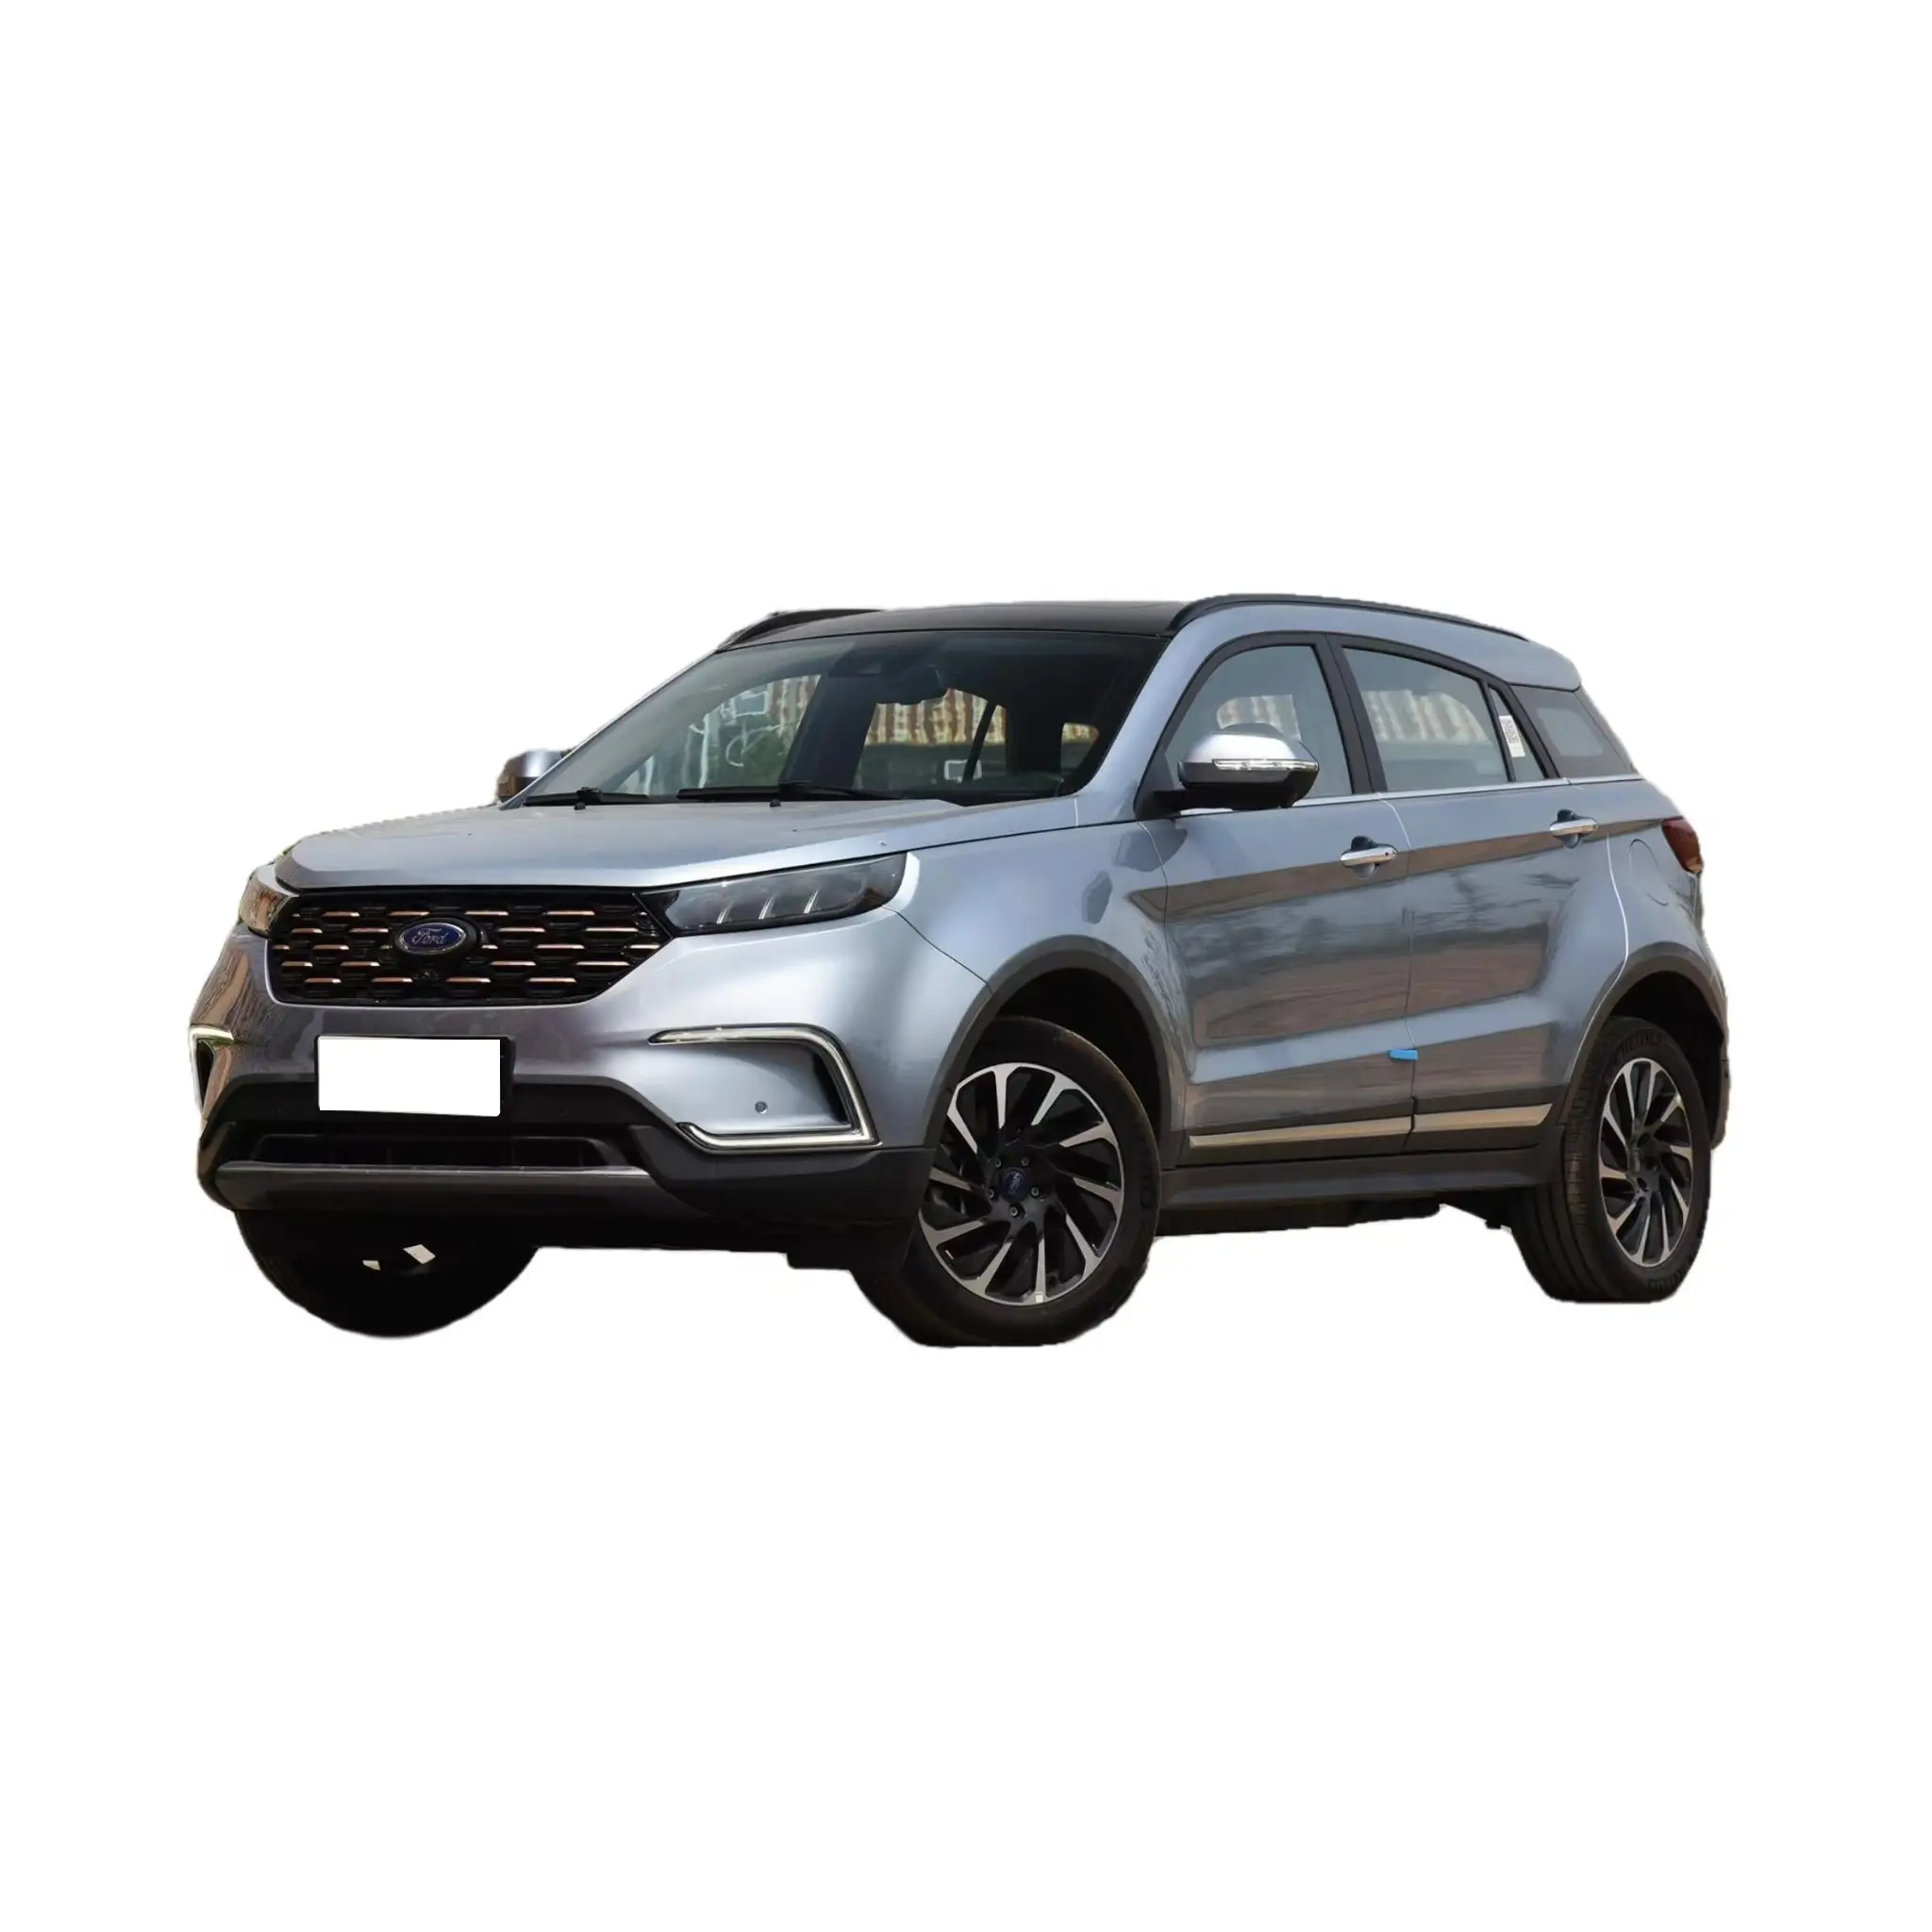 Best Selling Electric Car Ford Territory 100% Electric Car Cheap And High Quality Range 435km 5 Seats Left Hand Drive Vehicle